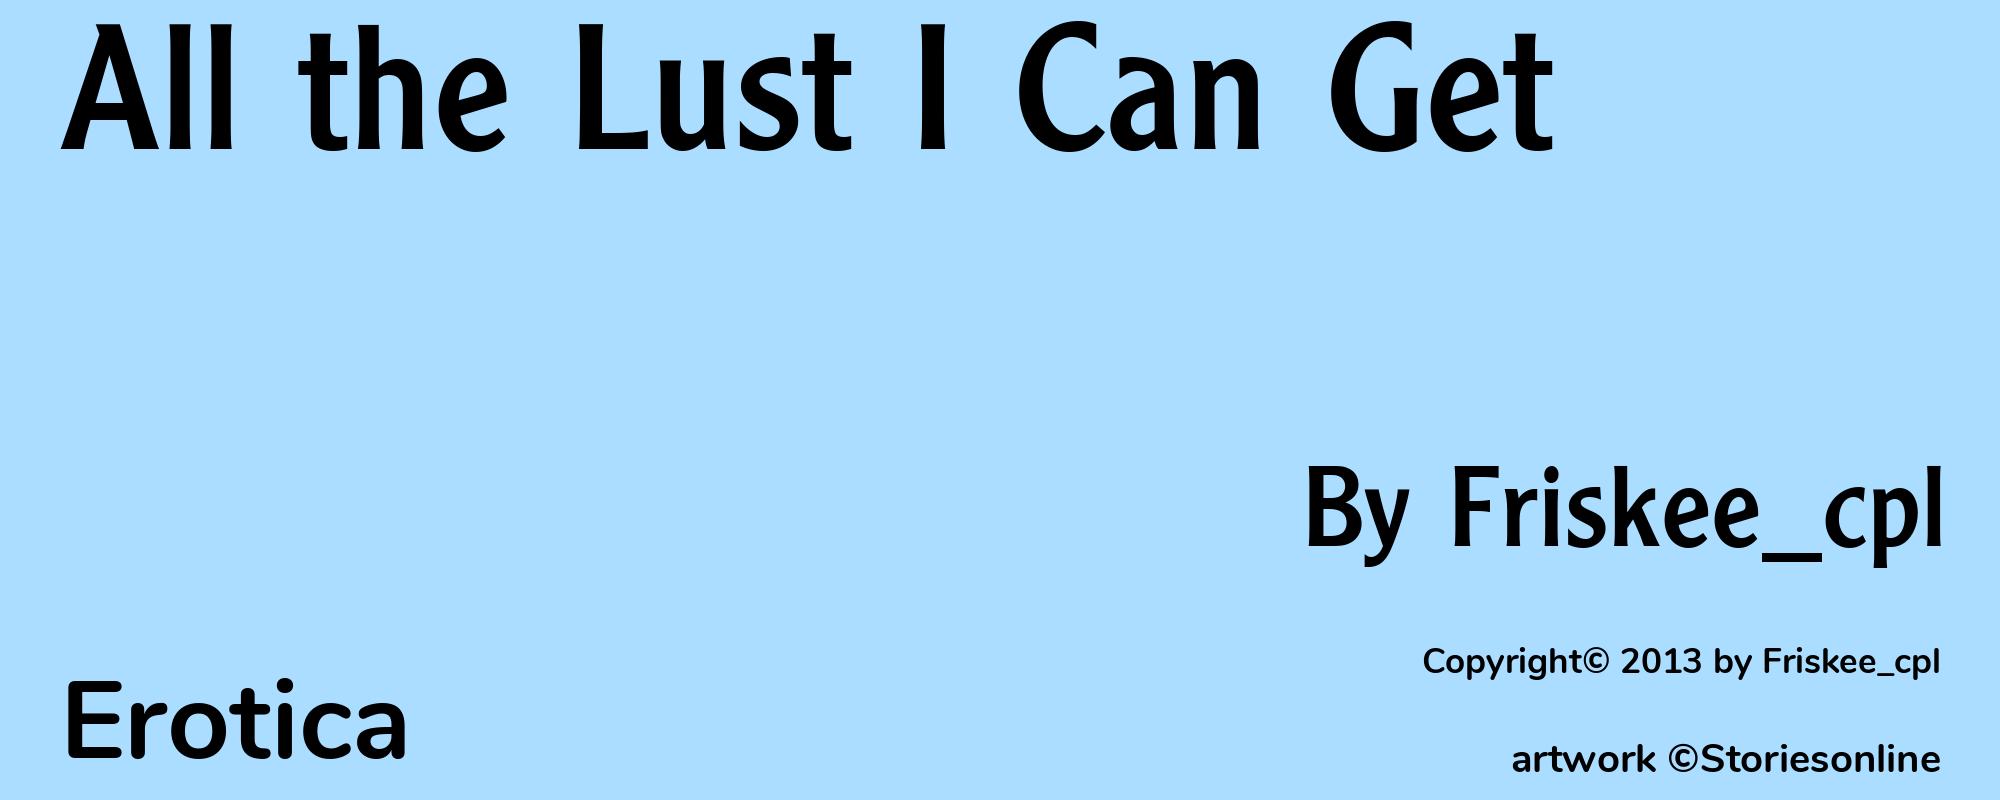 All the Lust I Can Get - Cover